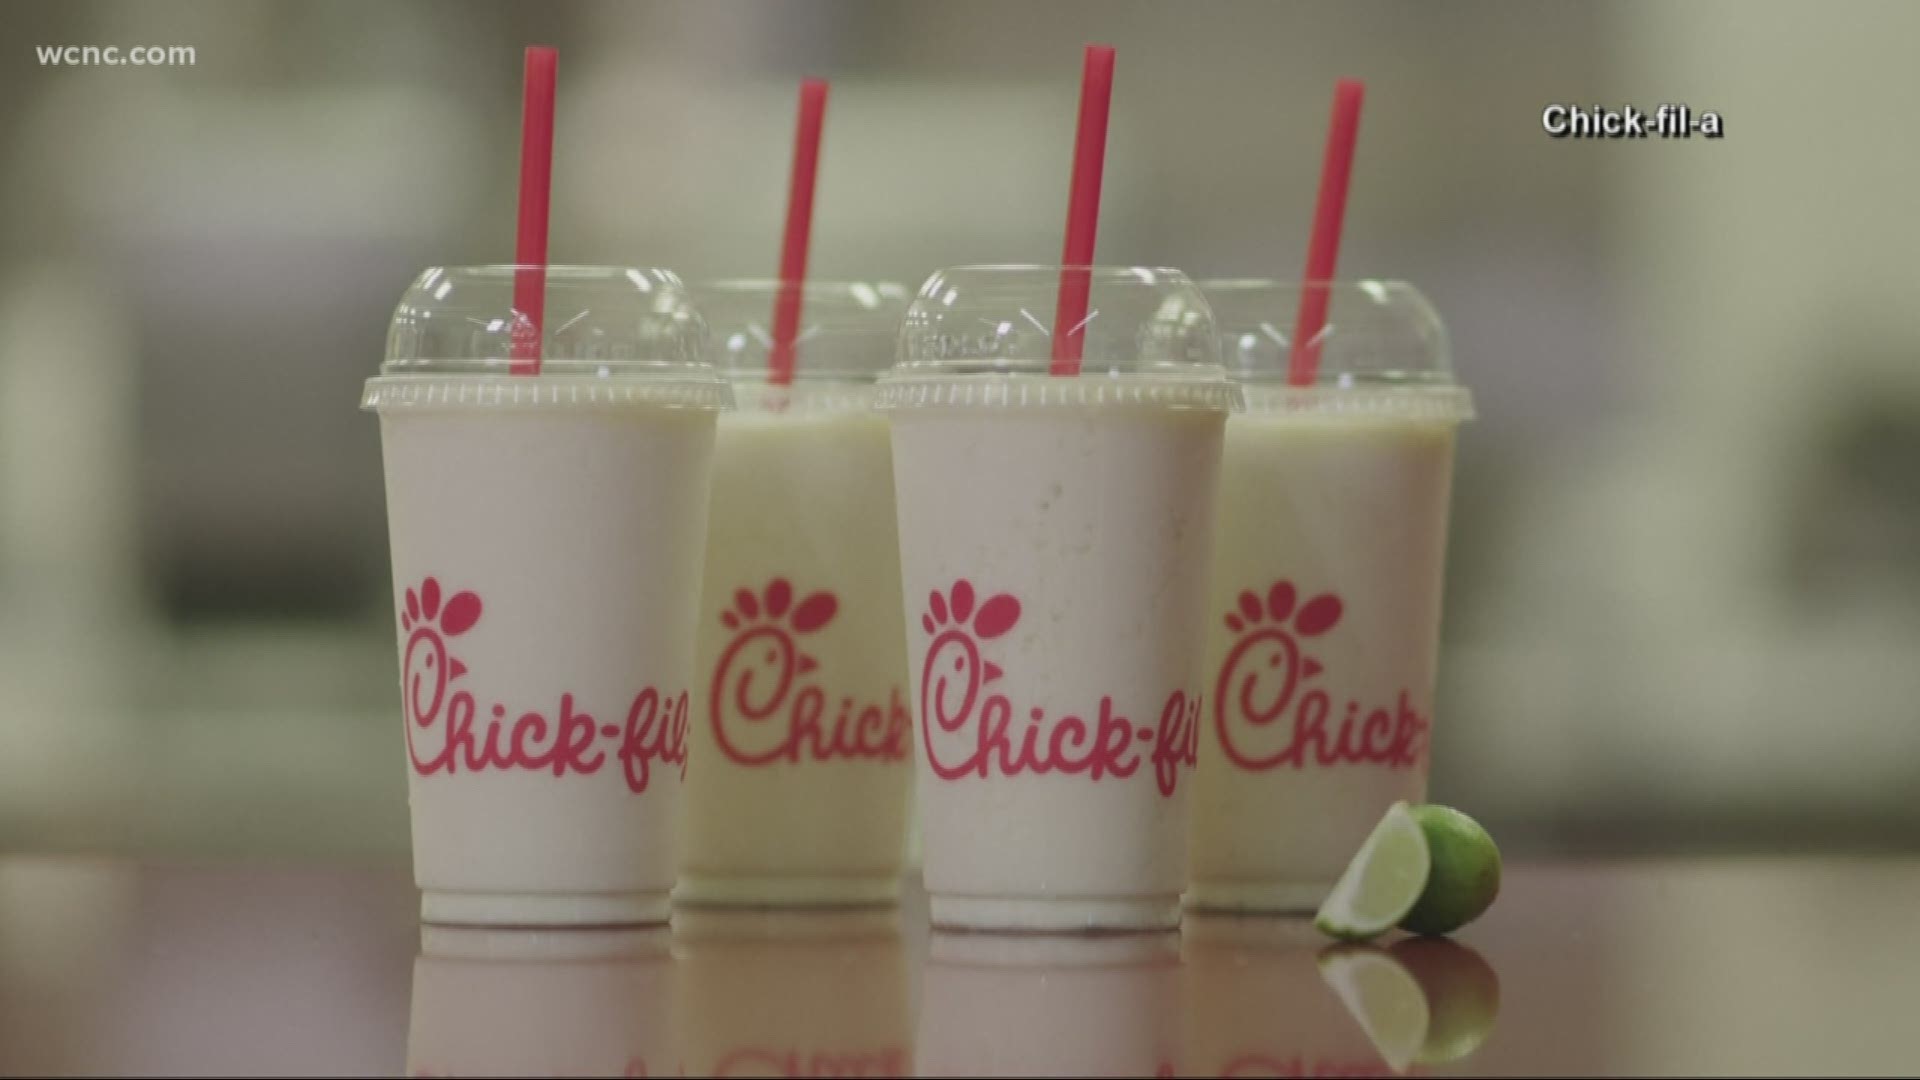 ChickfilA debuts its new Frosted Key Lime drink